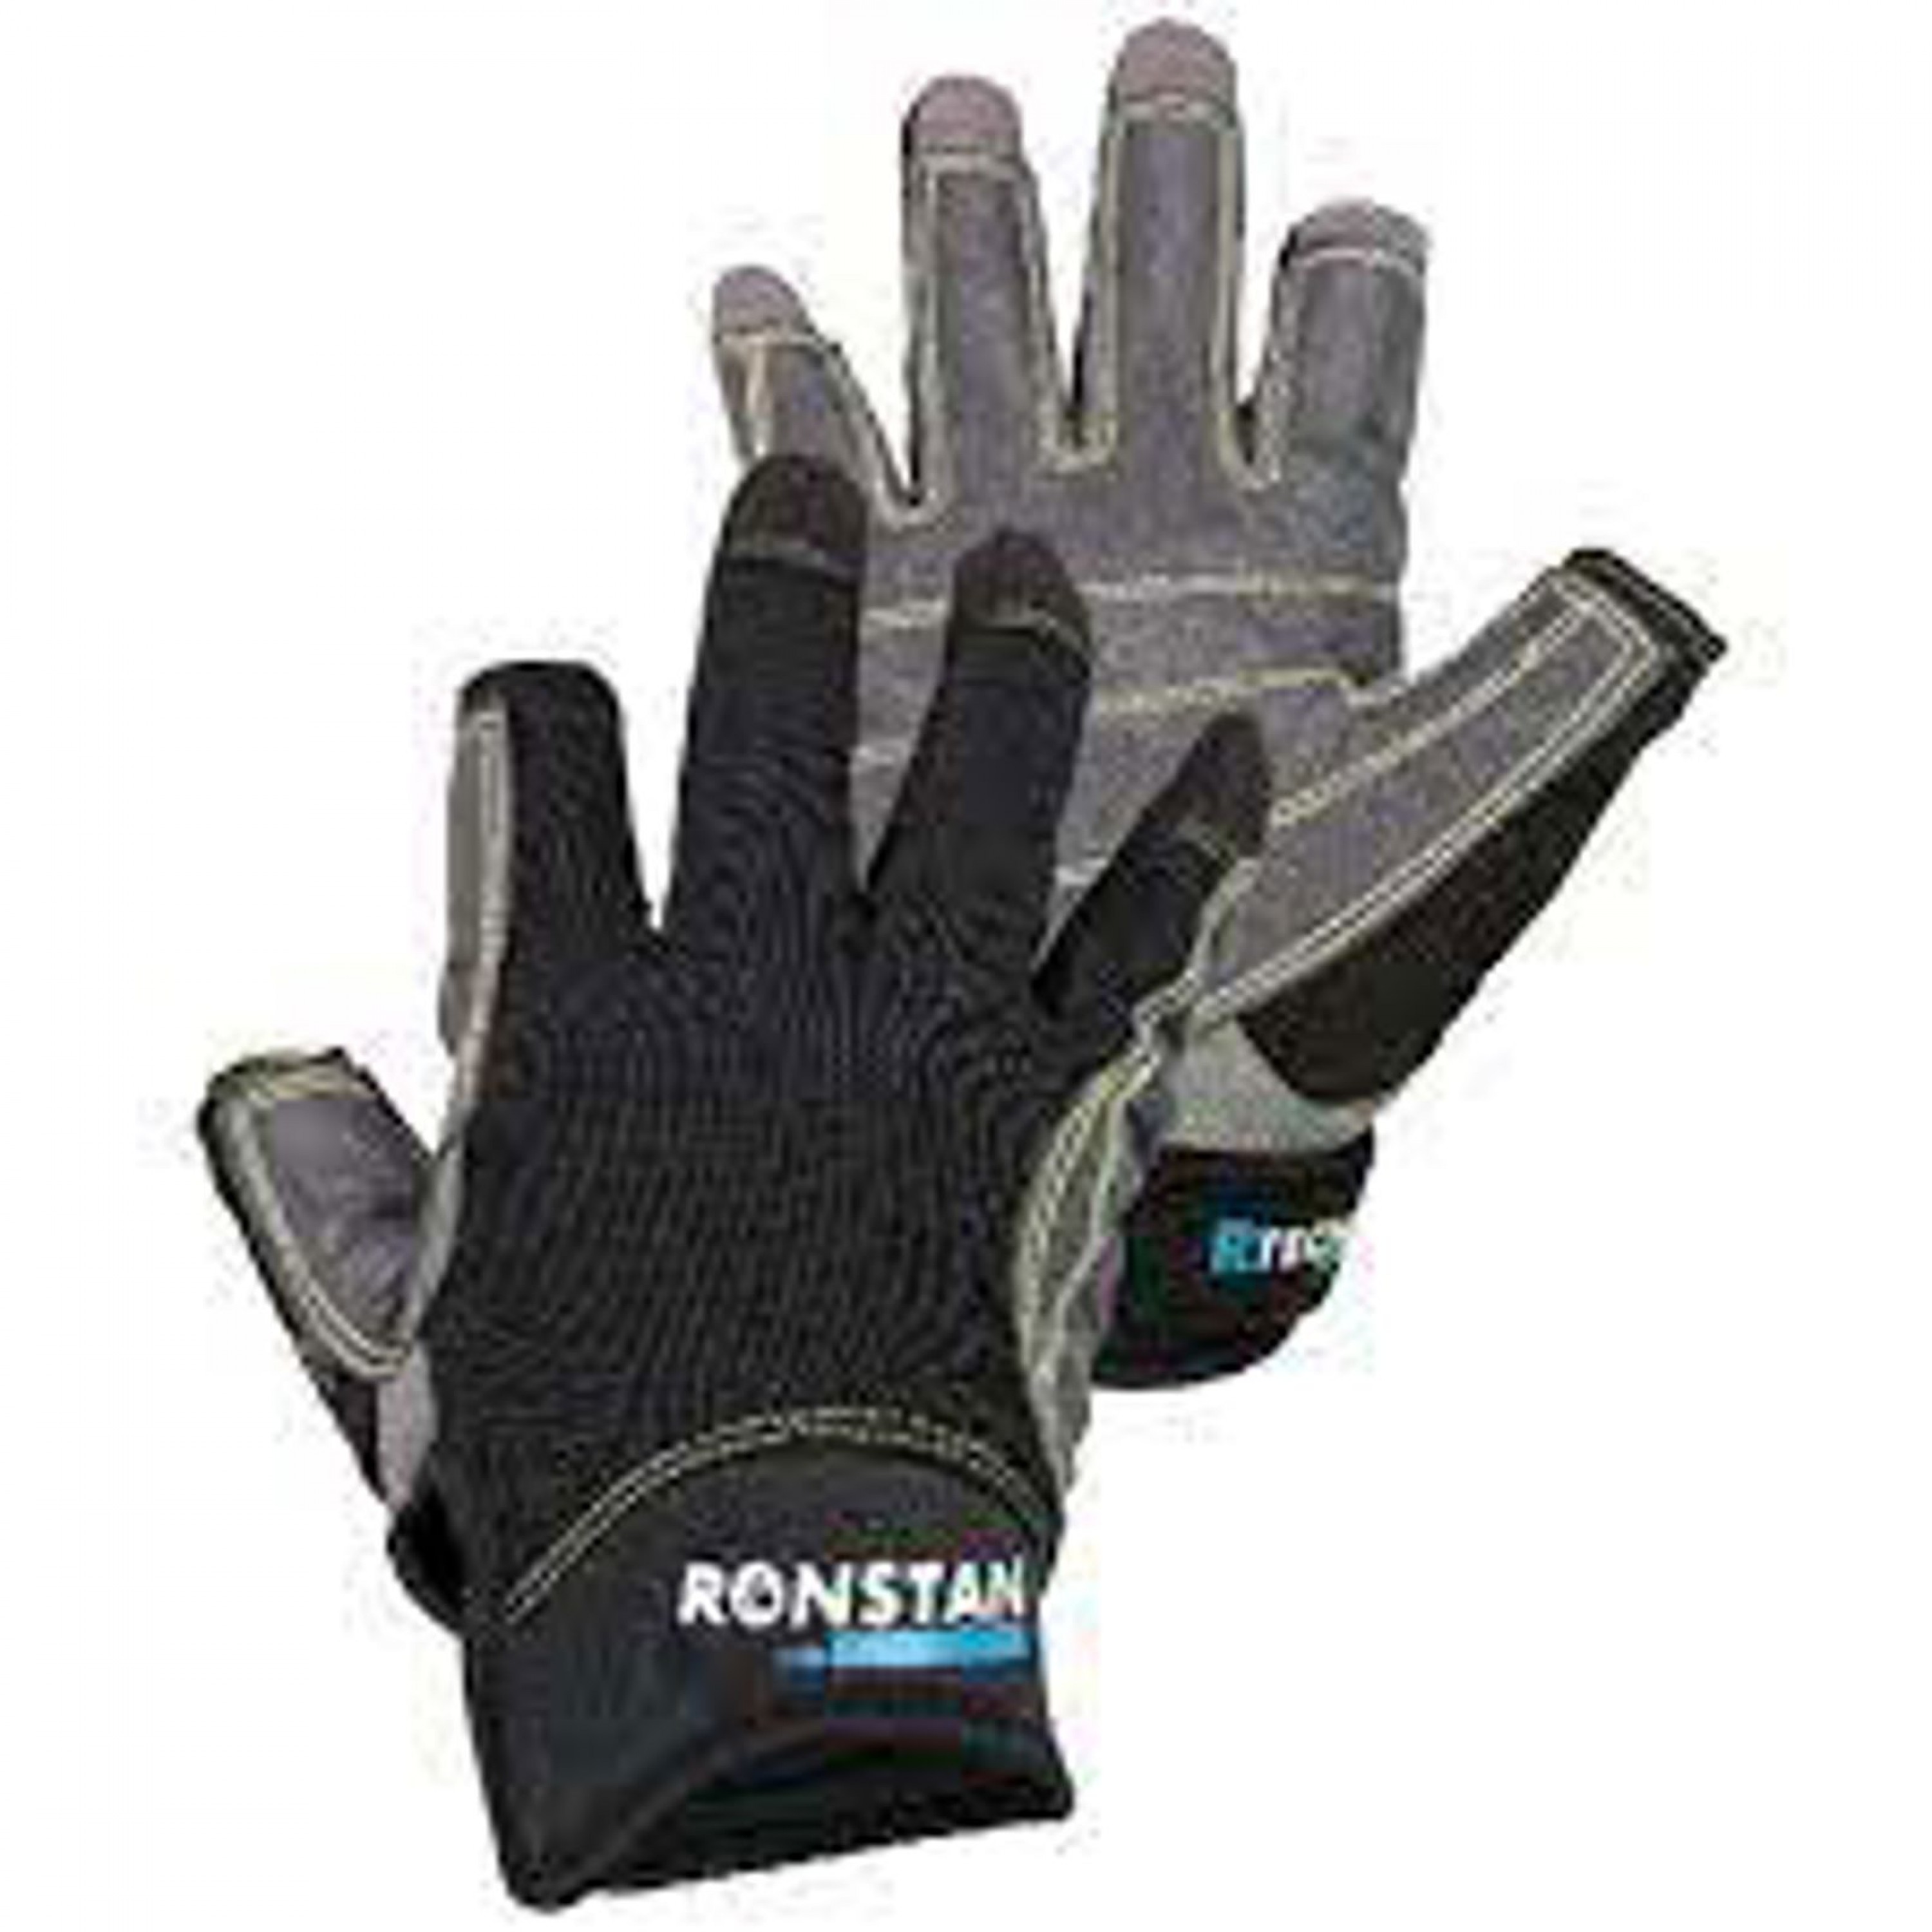 RONSTAN GLOVE 3 FINGER STICKY SMALL